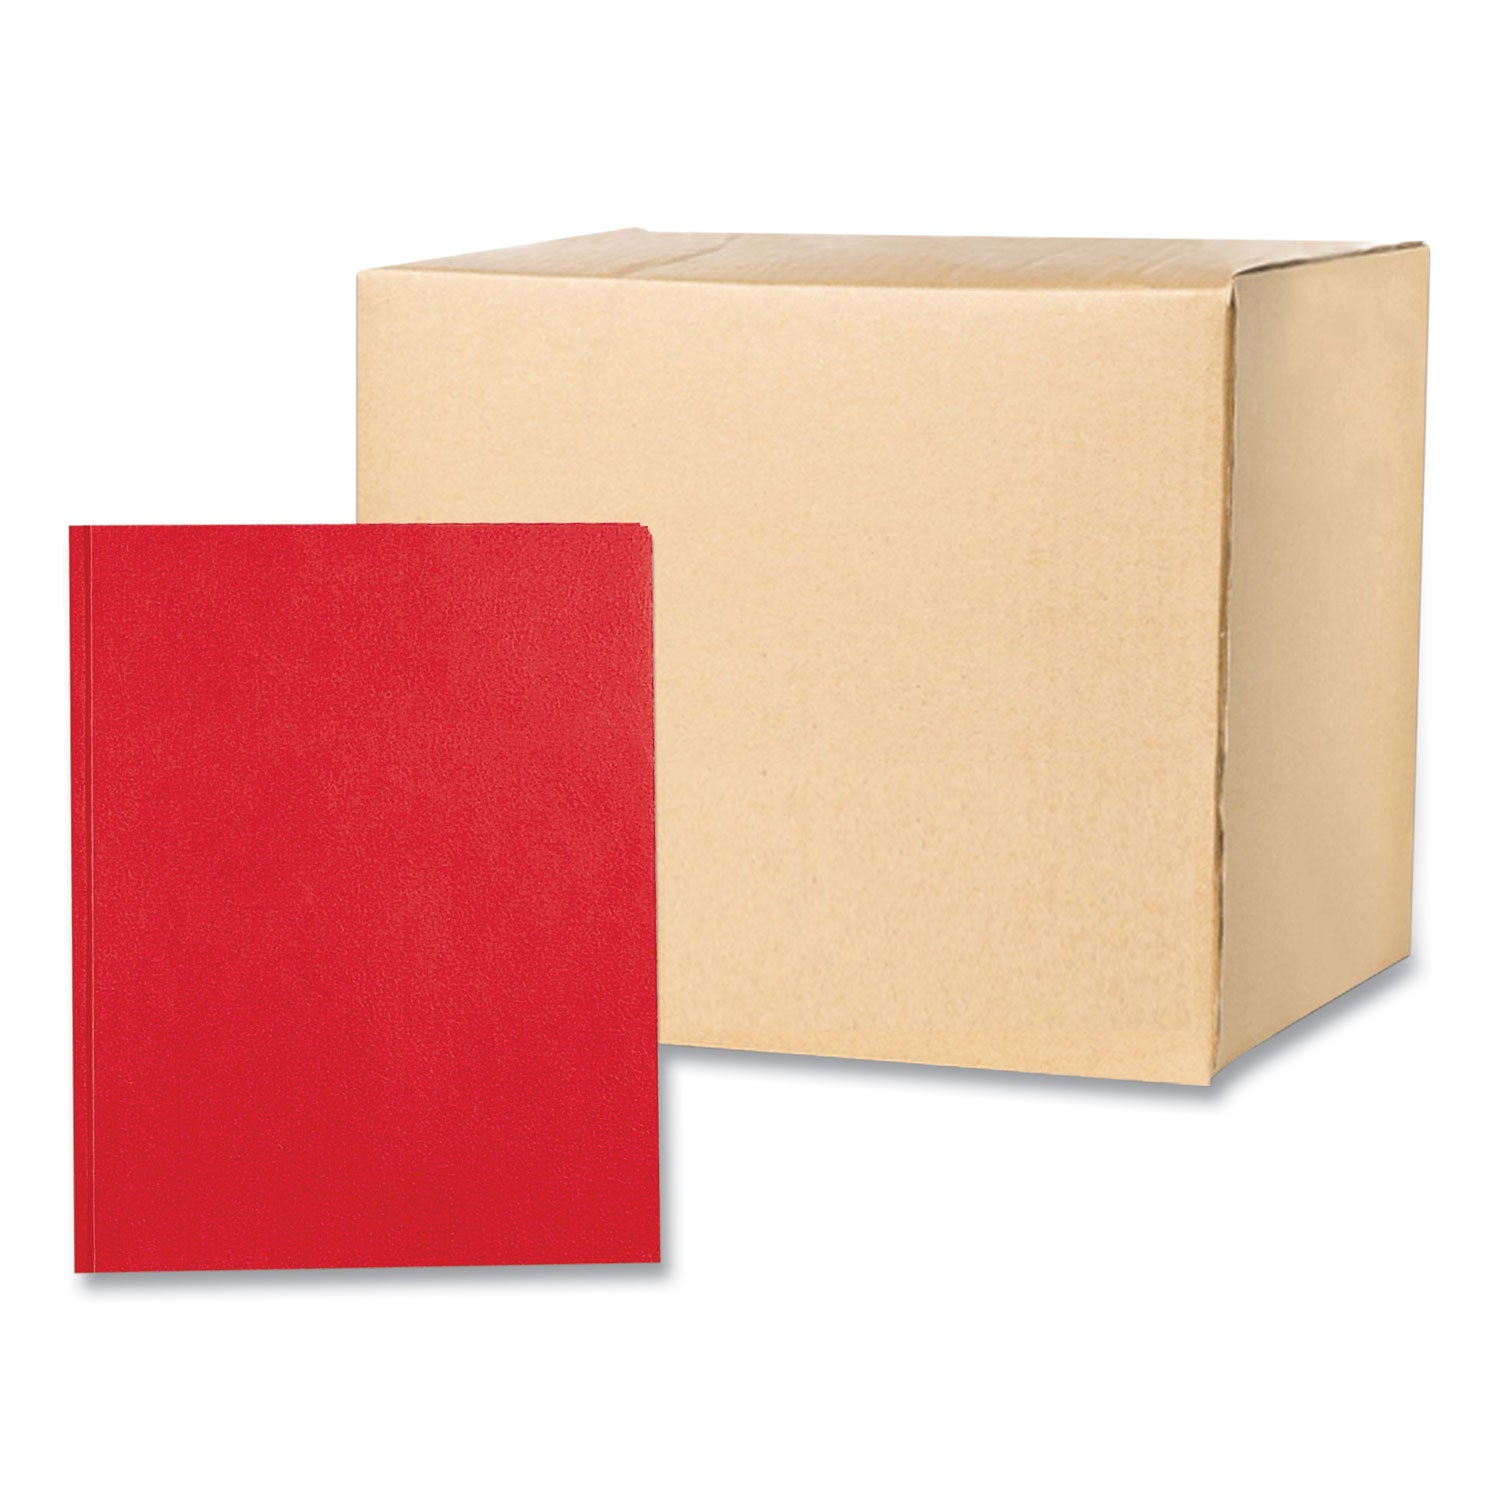 pocket-folder-with-3-fasteners-05-capacity-11-x-85-red-25-box-10-boxes-carton-ships-in-4-6-business-days_roa54126cs - 1